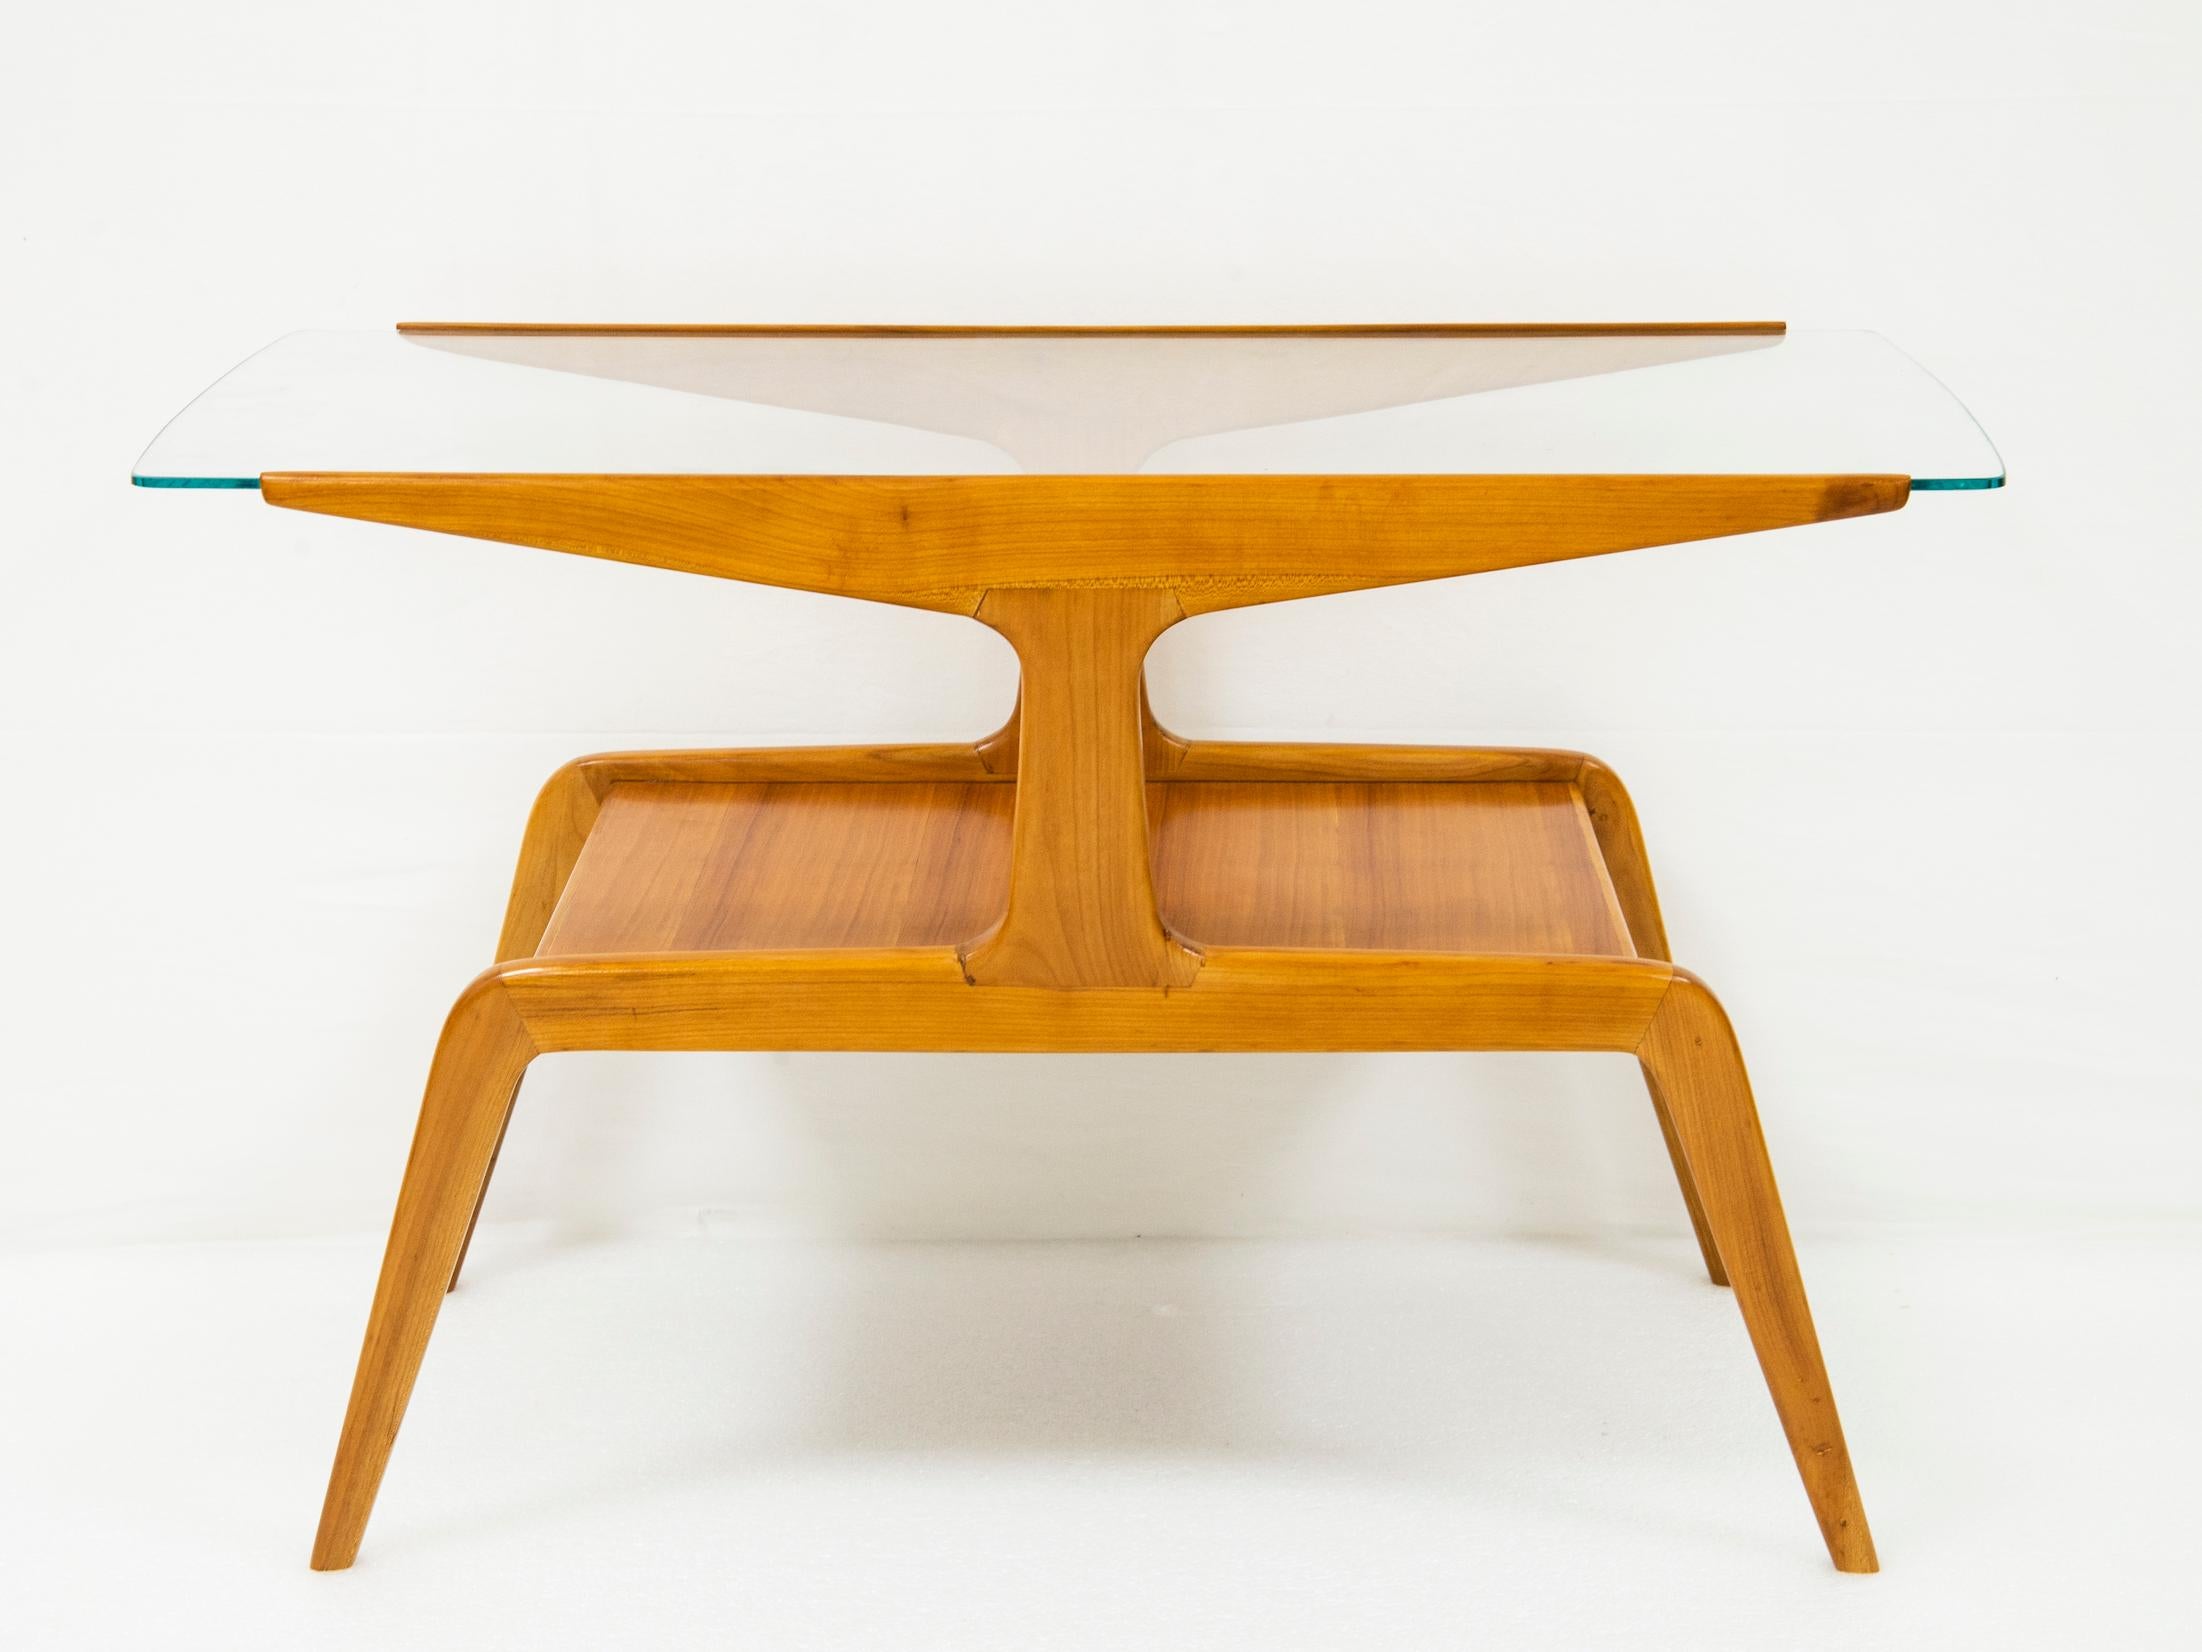 Gio Ponti (1891-1979)
Coffee table or side table
Wood, glass
Italy, circa 1950.
Measures: H 53 x W 84 x D 41 cm.